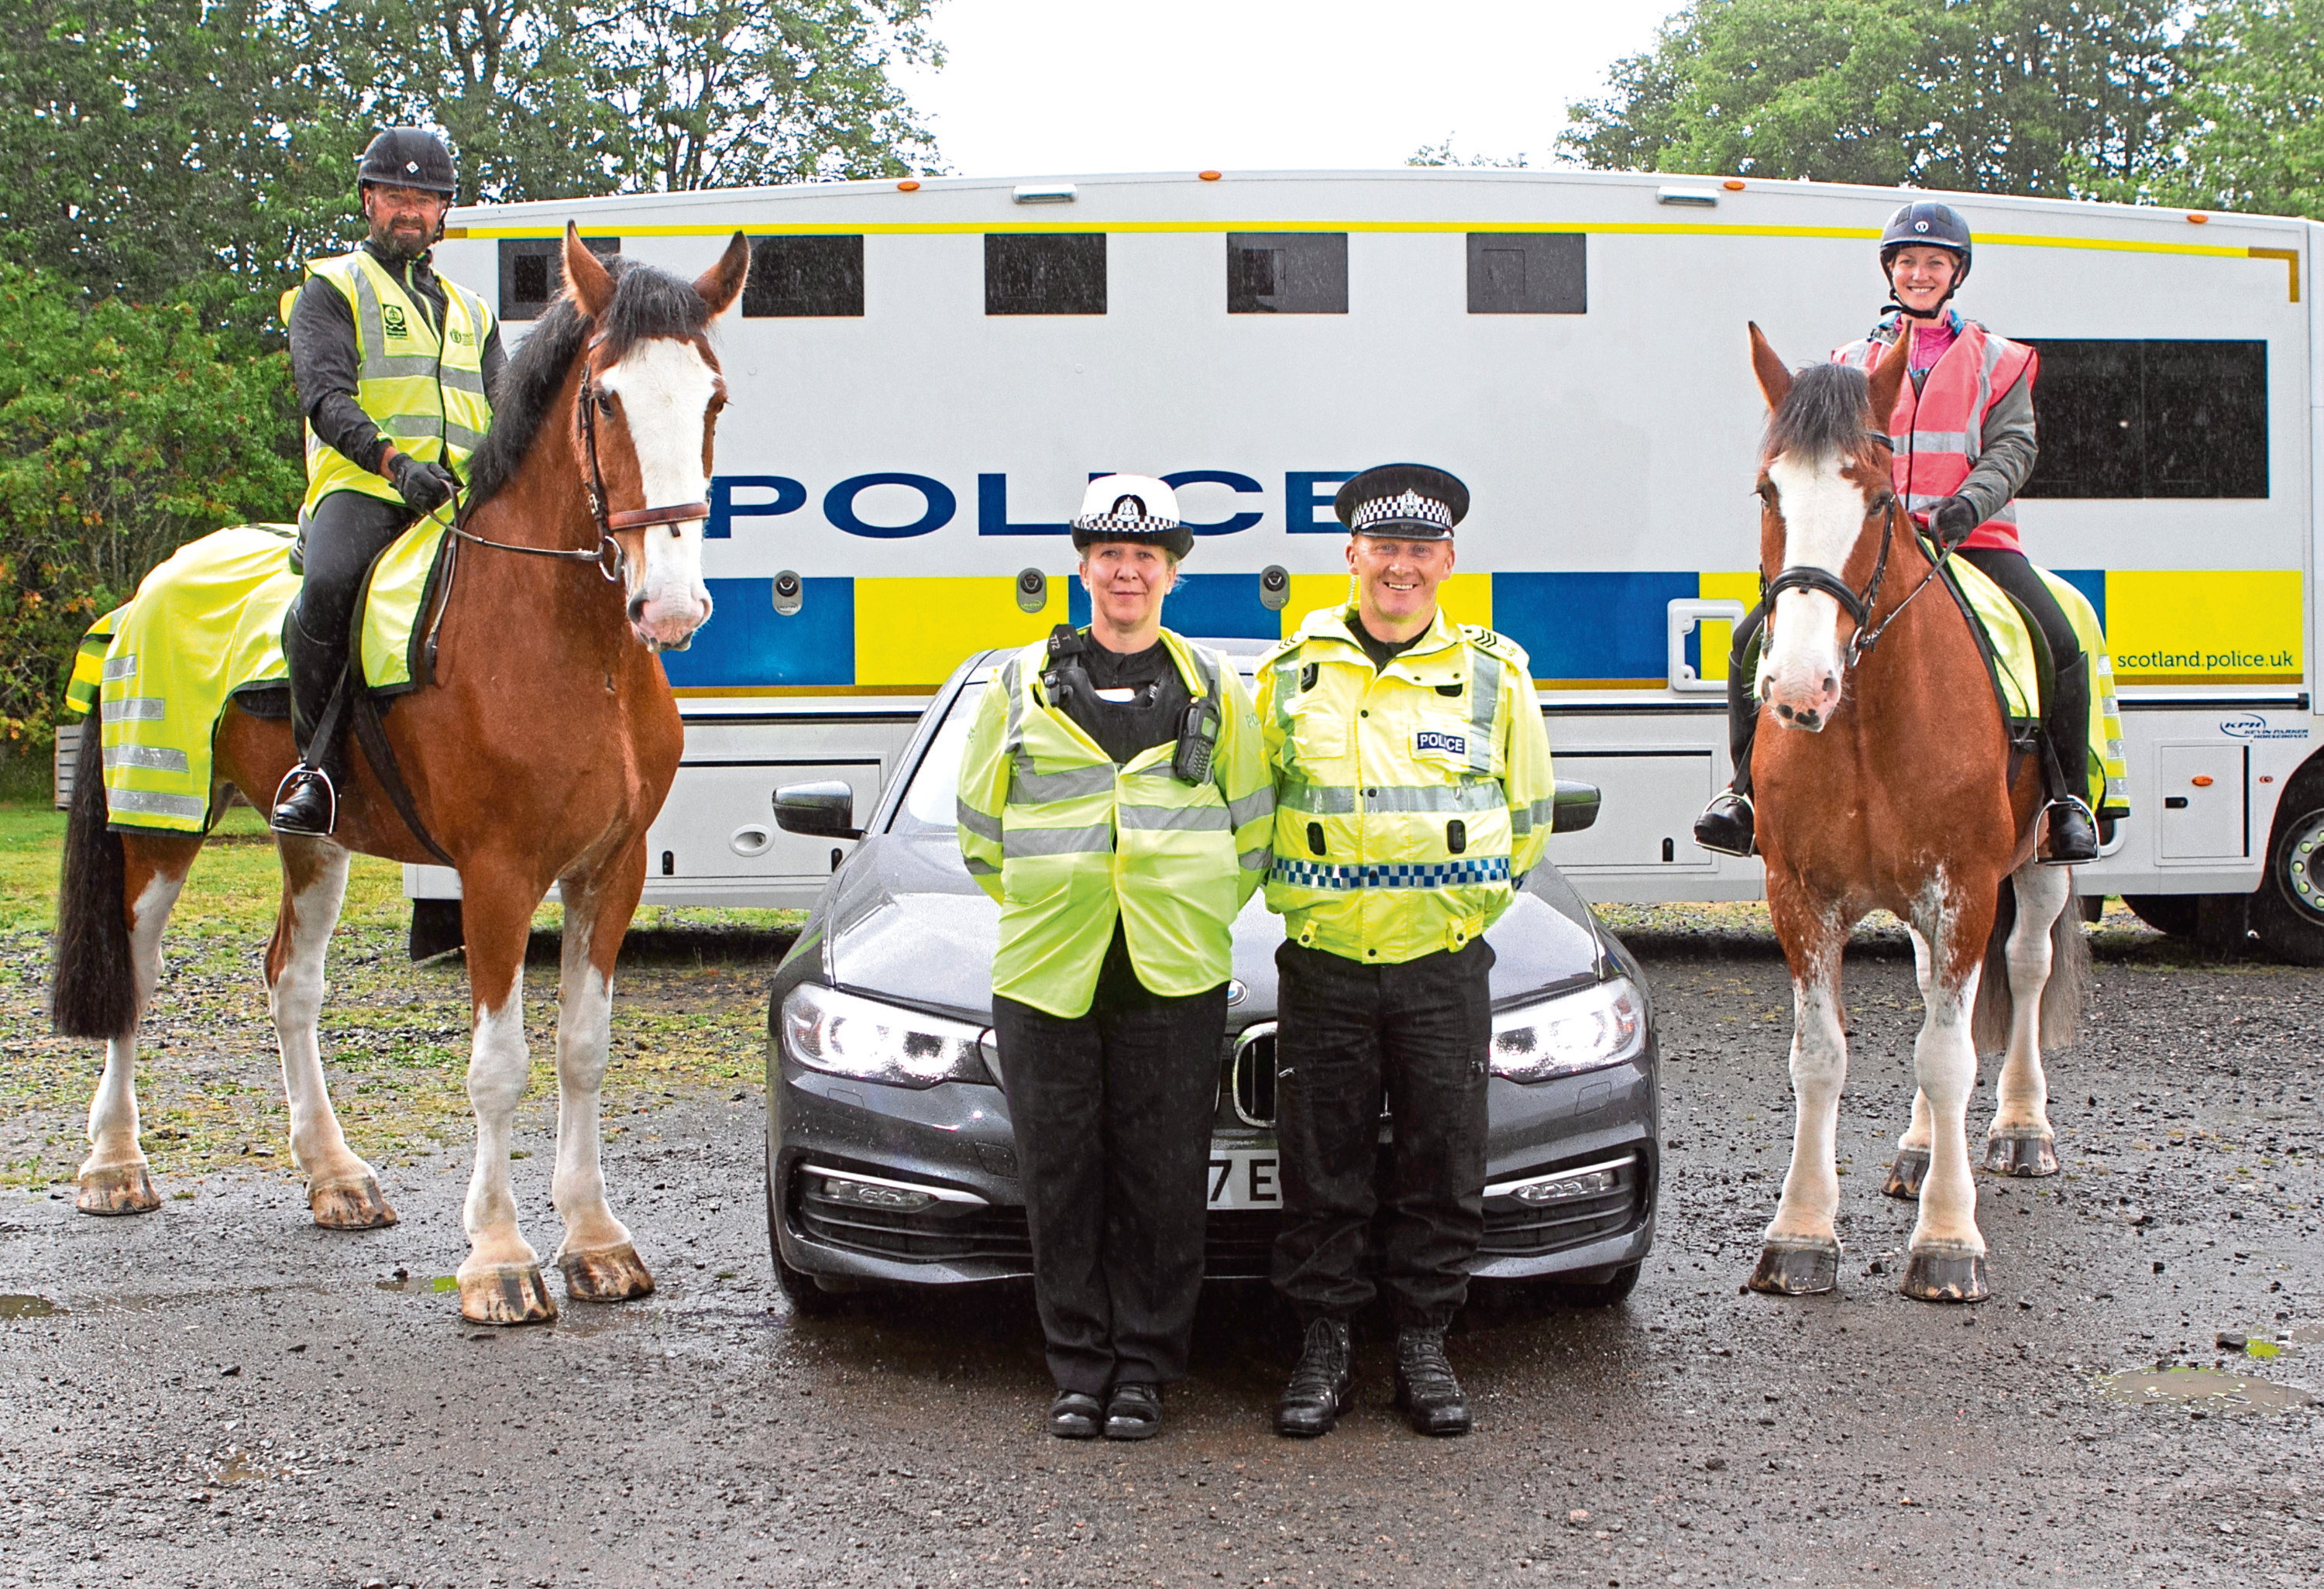 Torrance Police Scotland using unmarked officers on horse's to highlight giving space when over taking